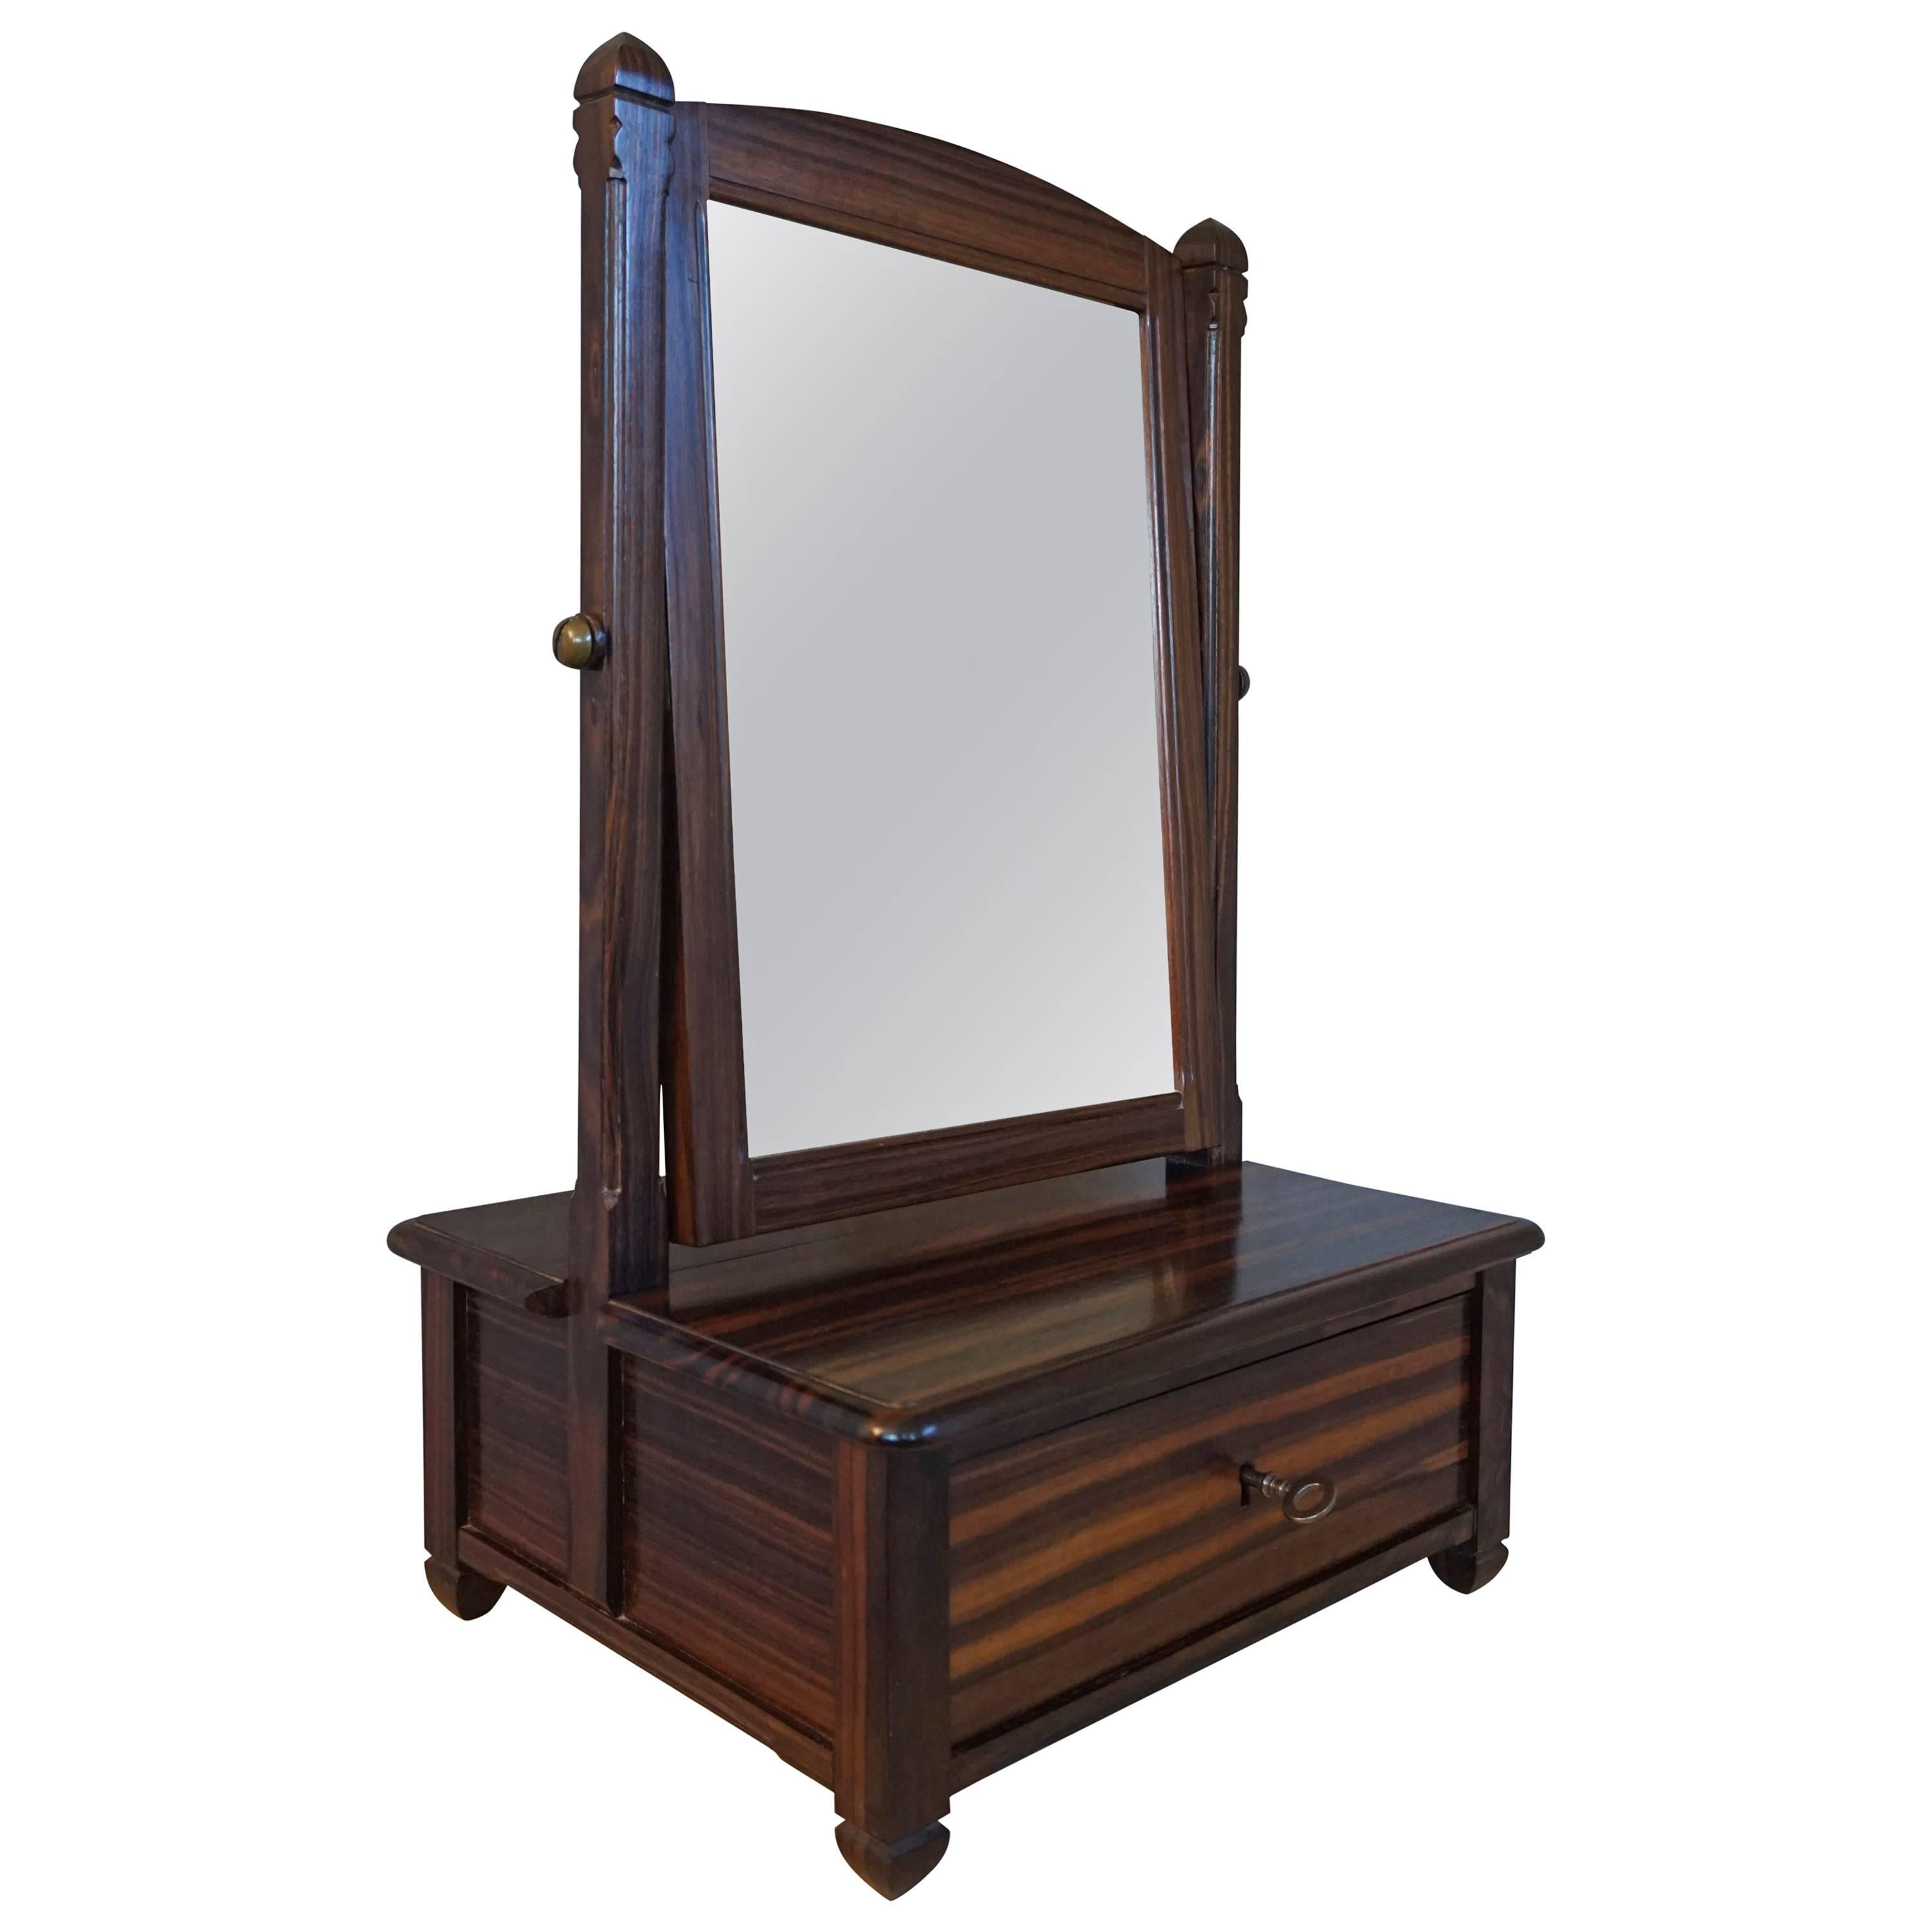 Stunning Arts and Crafts Solid Coromandel Vanity w. Drawer and Adjustable Mirror For Sale